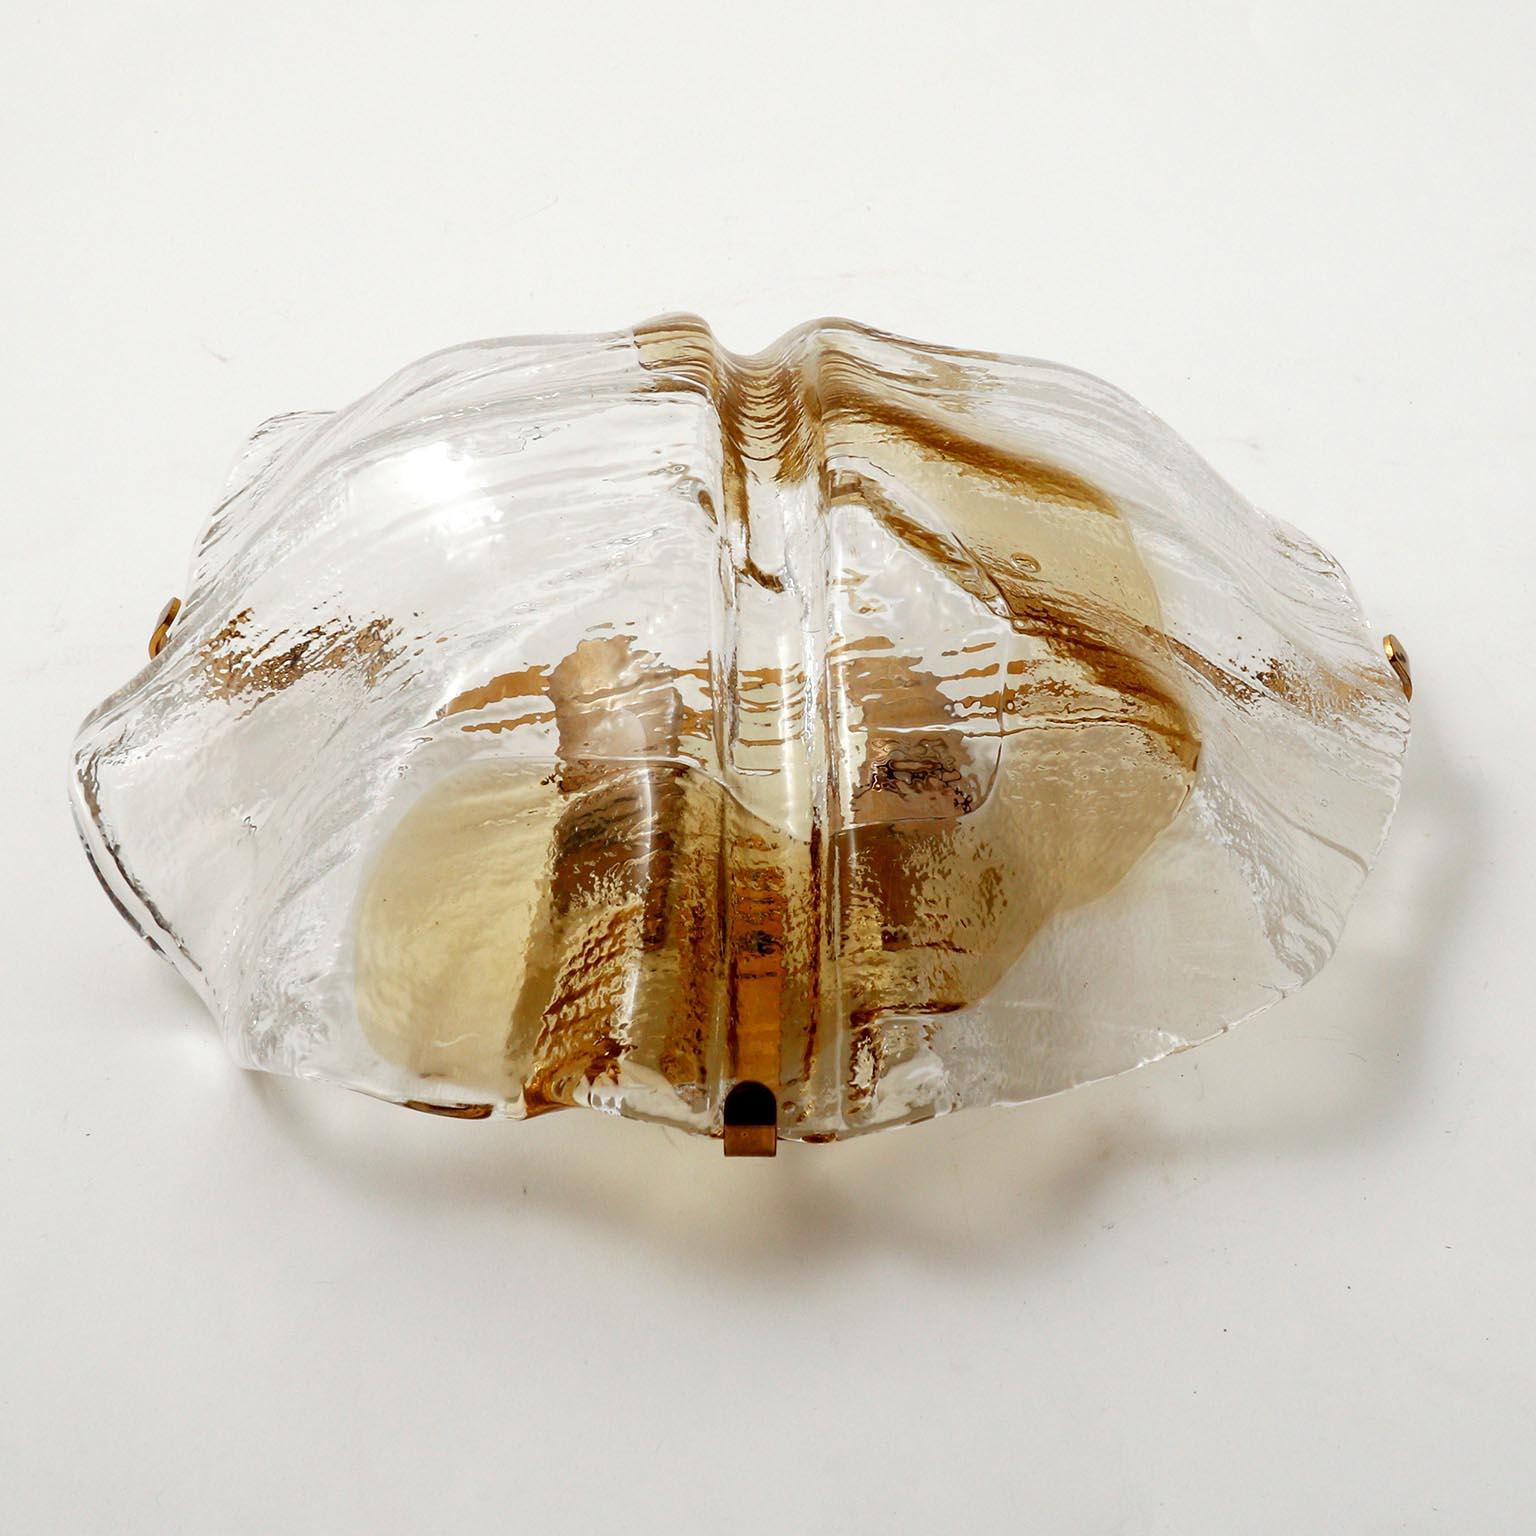 A wall light fixture by J.T. Kalmar, Austria, manufactured in midcentury, circa 1970 (late 1960s or early 1970s). 
An organic shaped clear and amber, golden or bronze toned Murano glass lamp shade is held by a brass bracket on a metal backplate. The